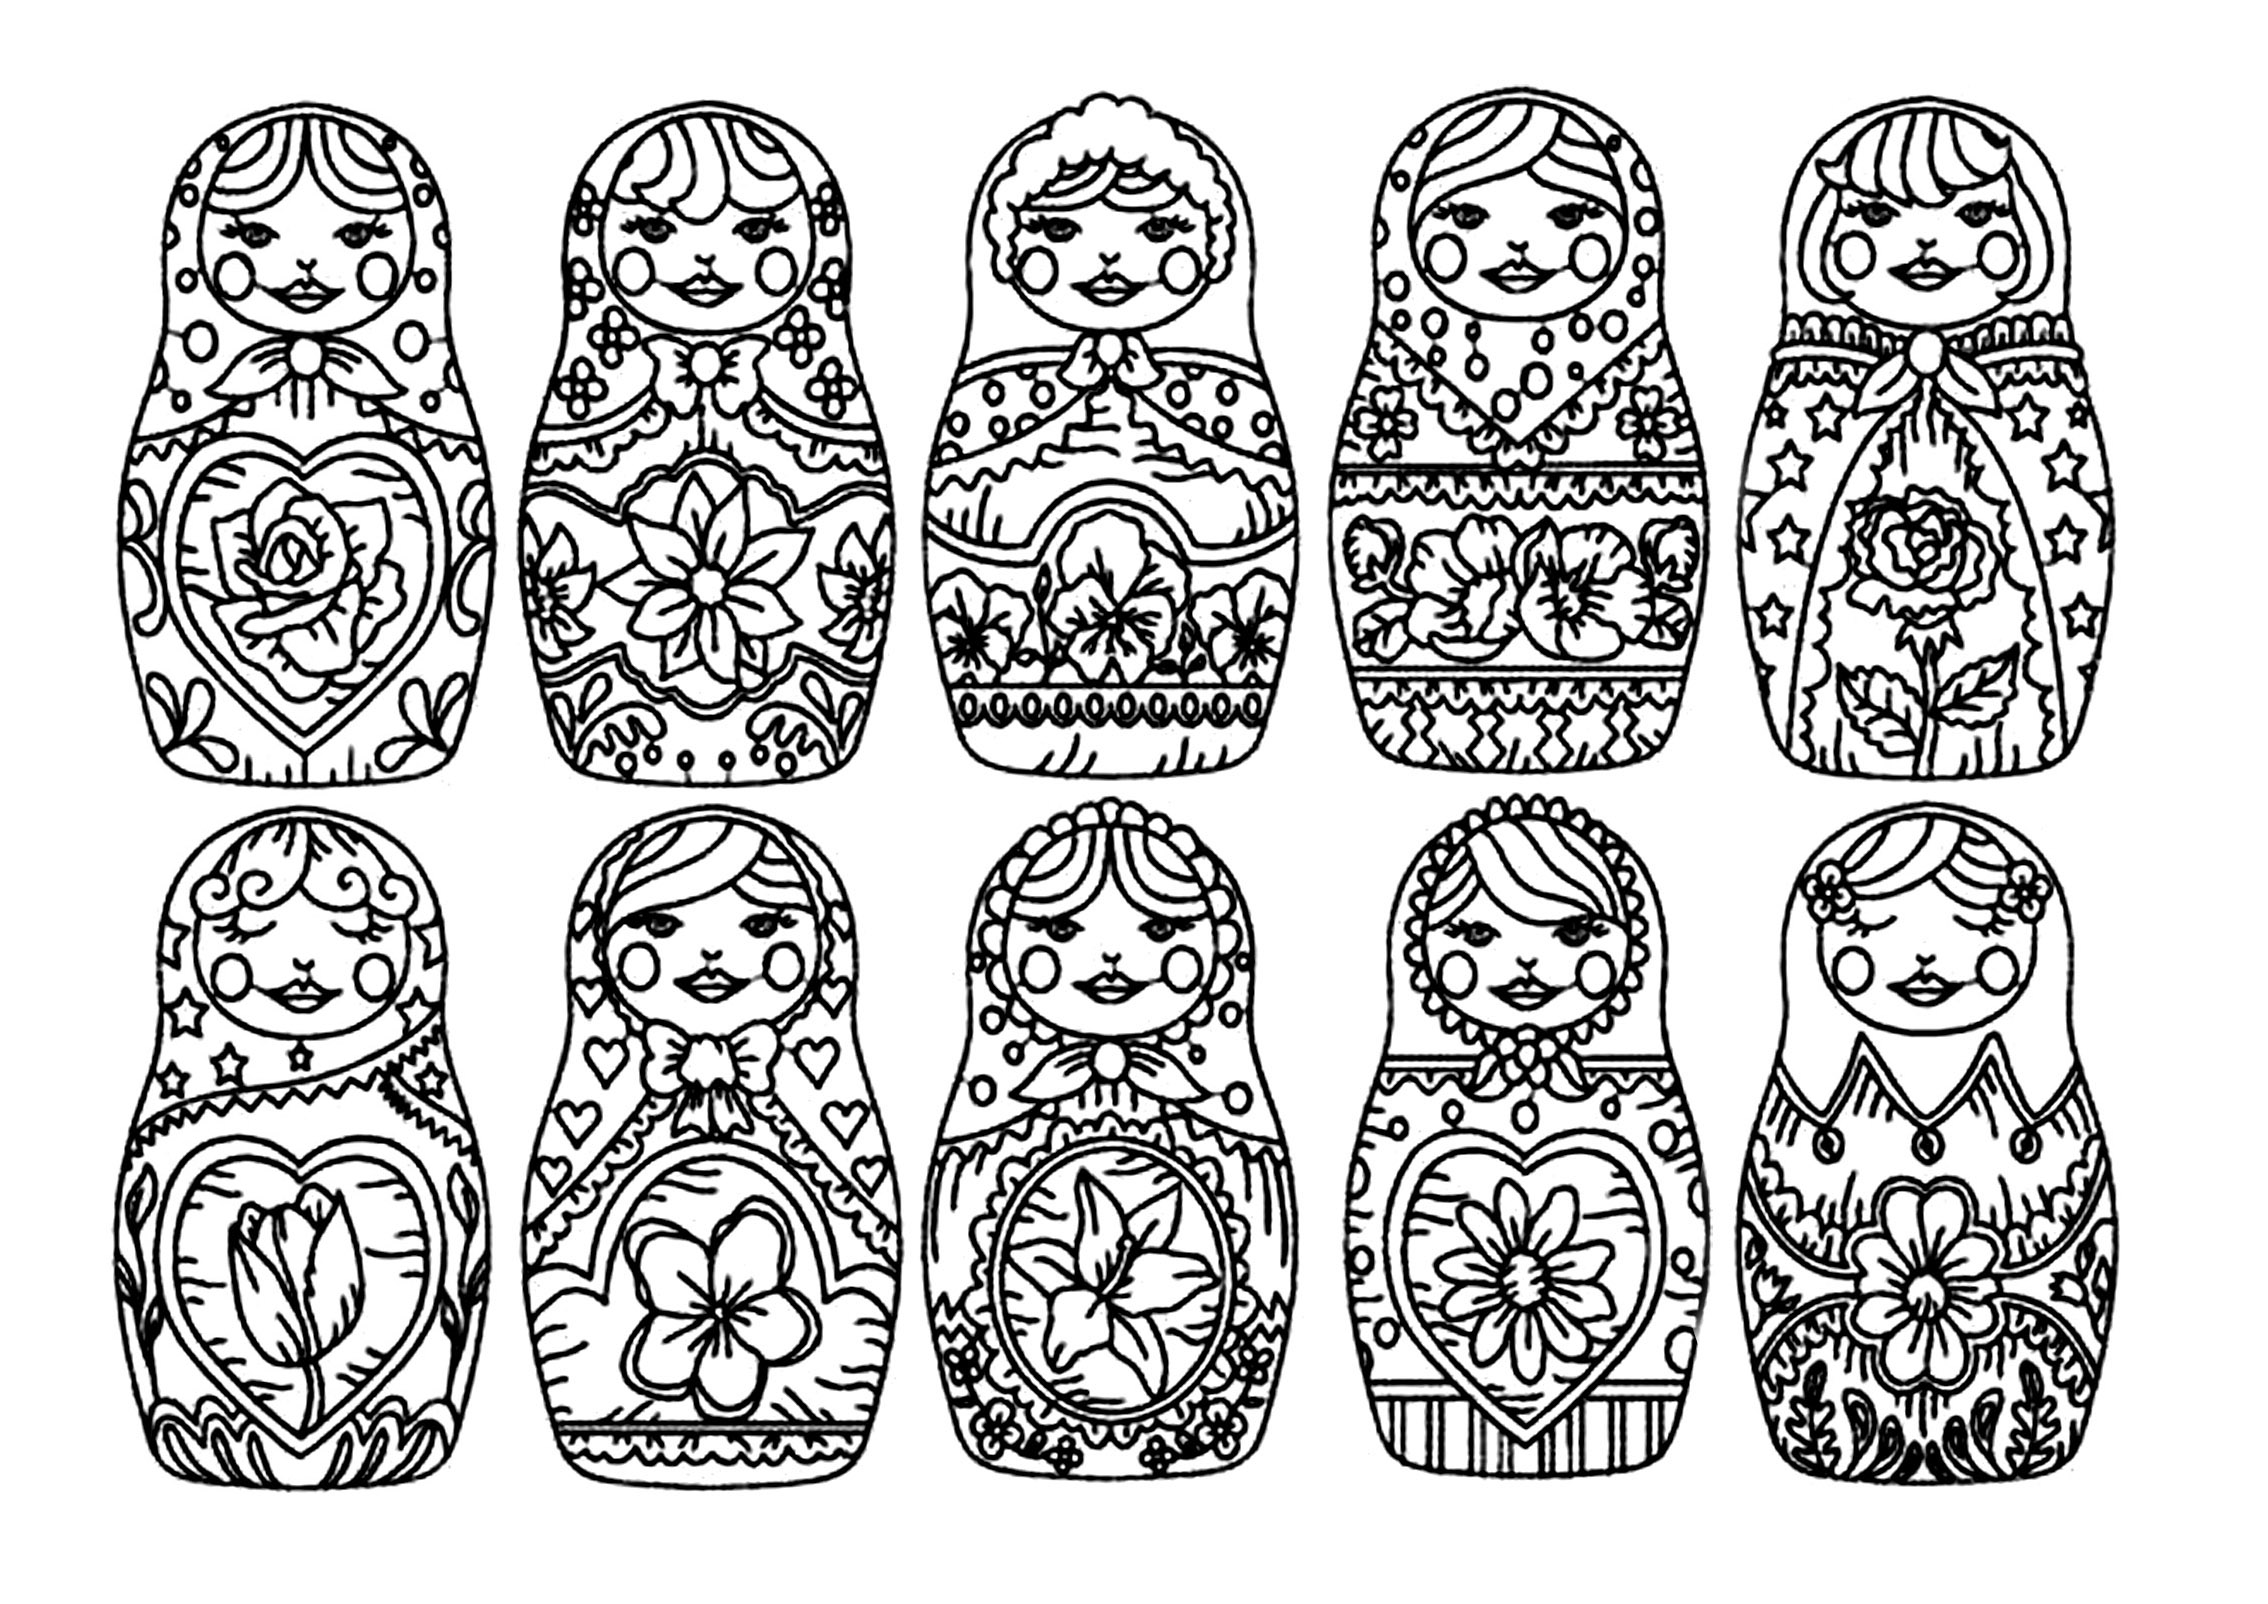 Russian dolls - 1 - Image with : Russia